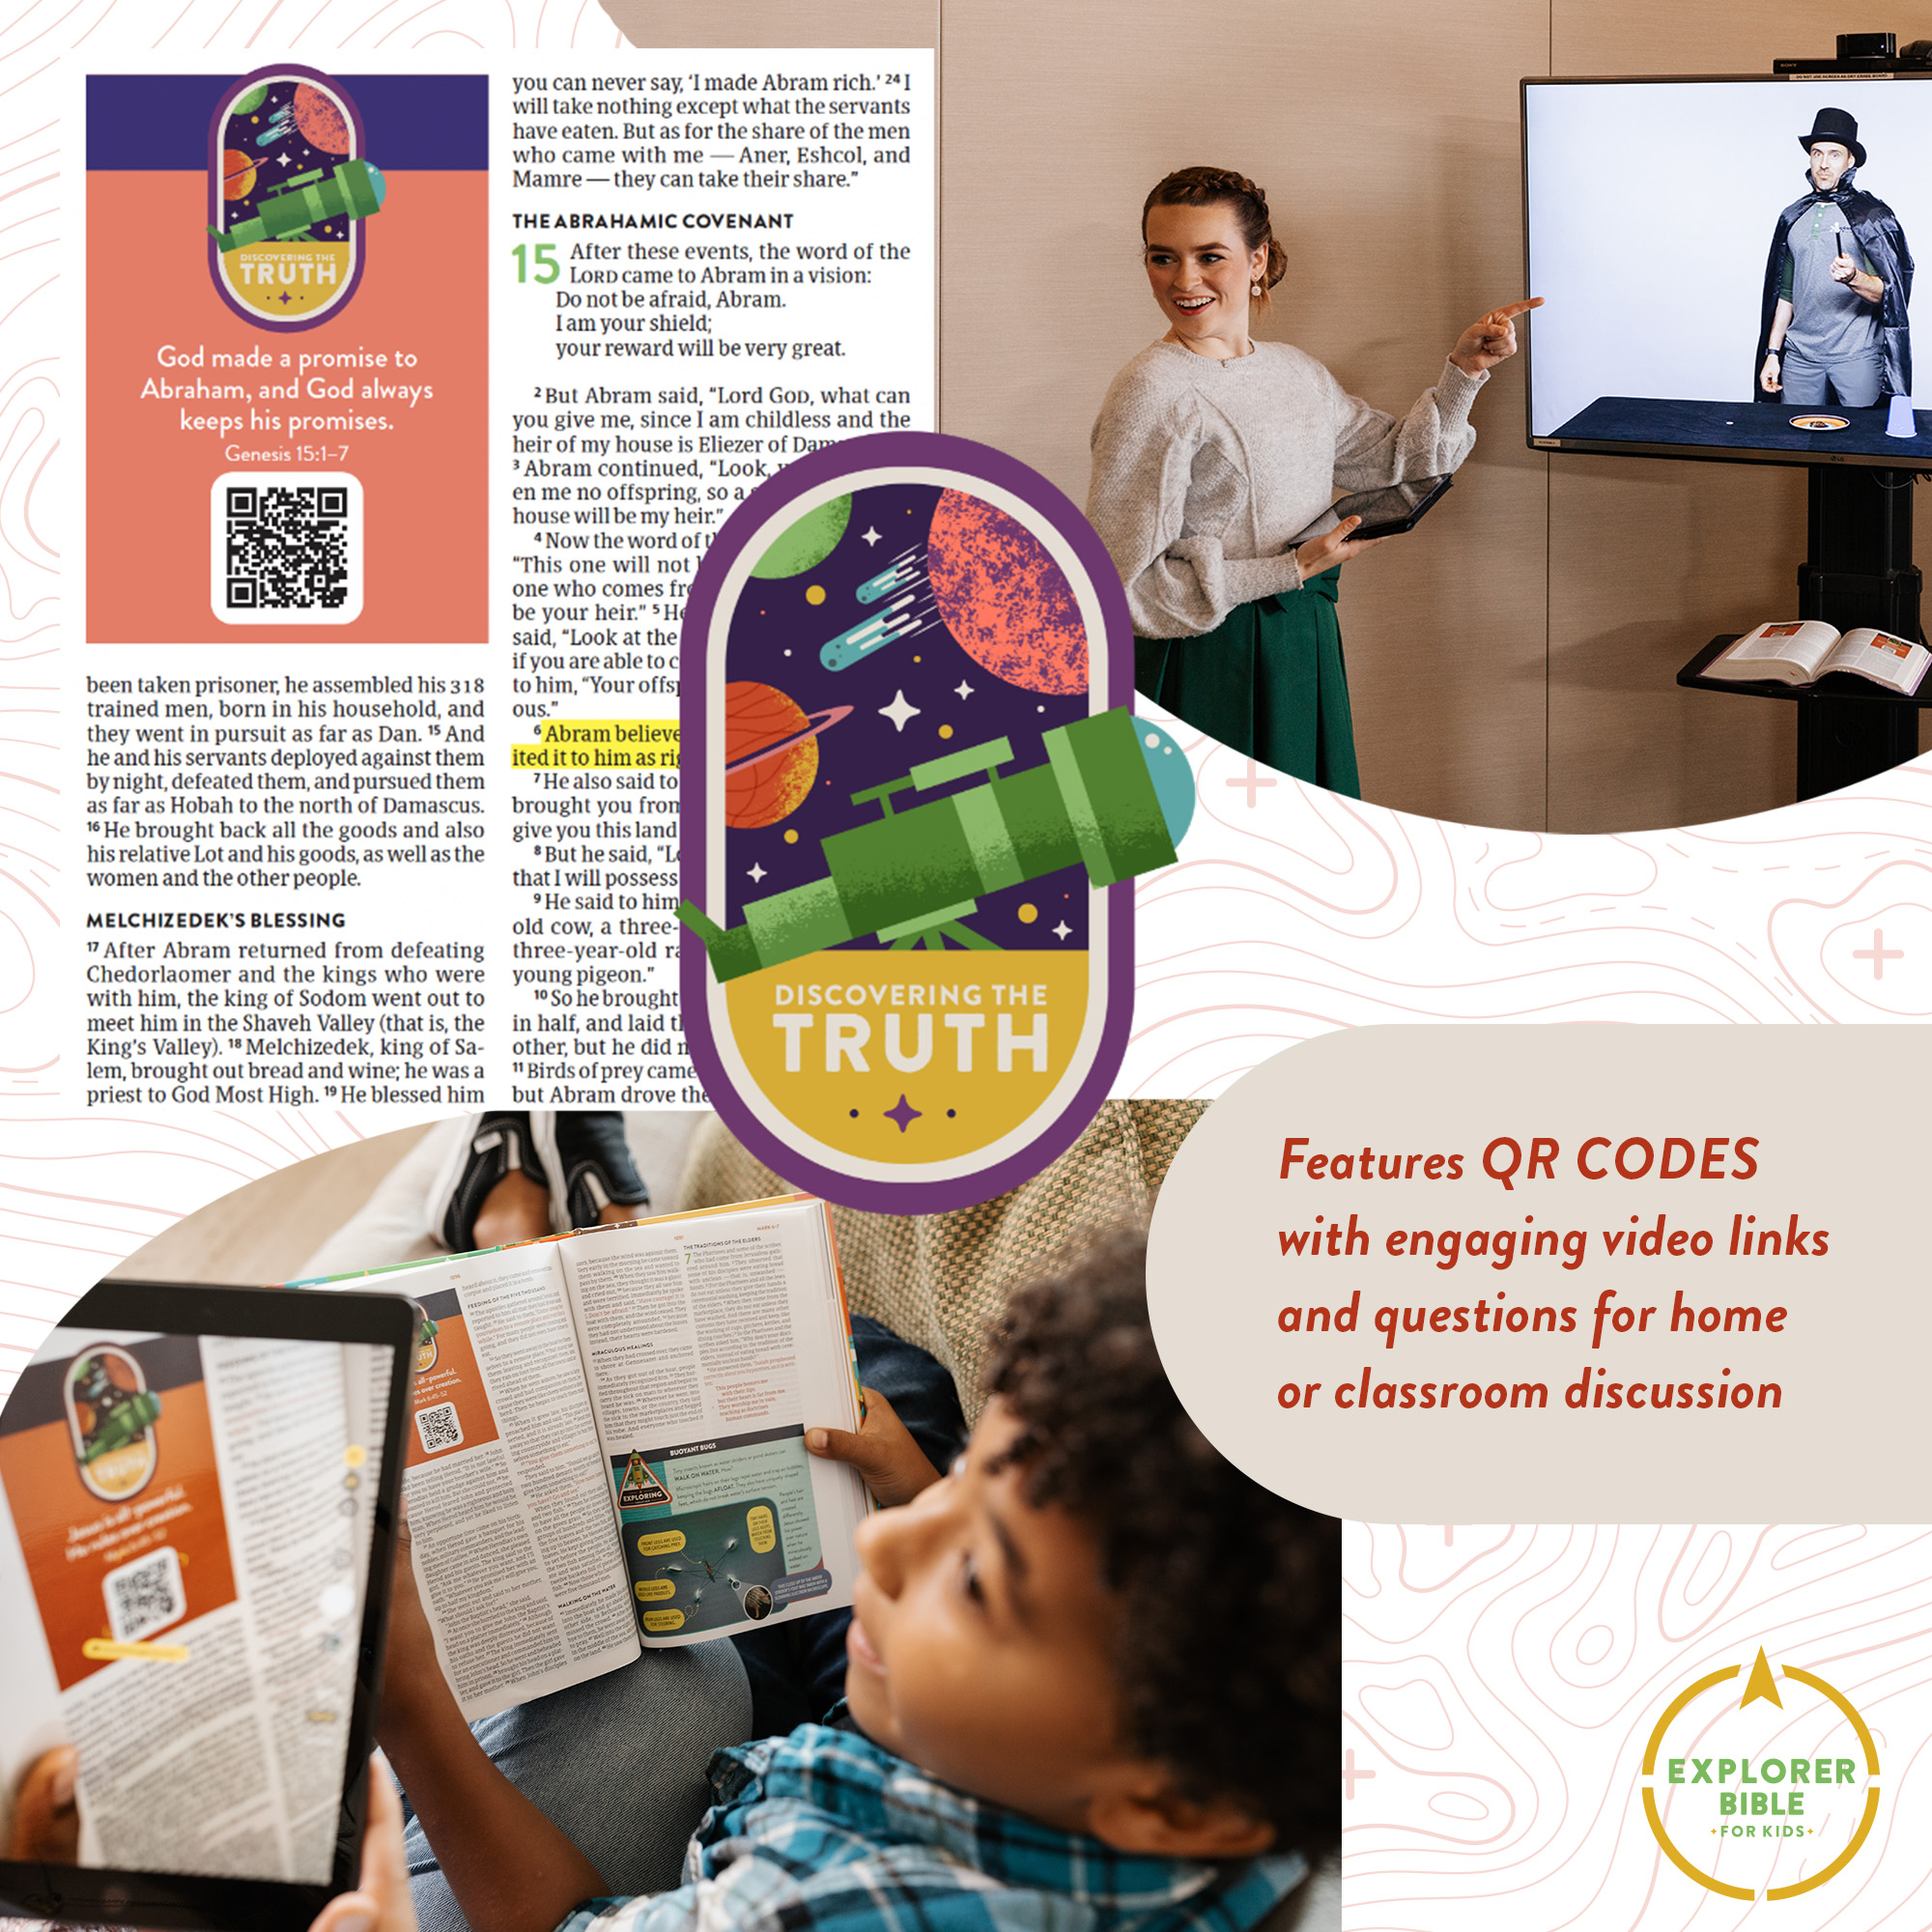 Explorer Bible for Kids with QR code to engaging video links